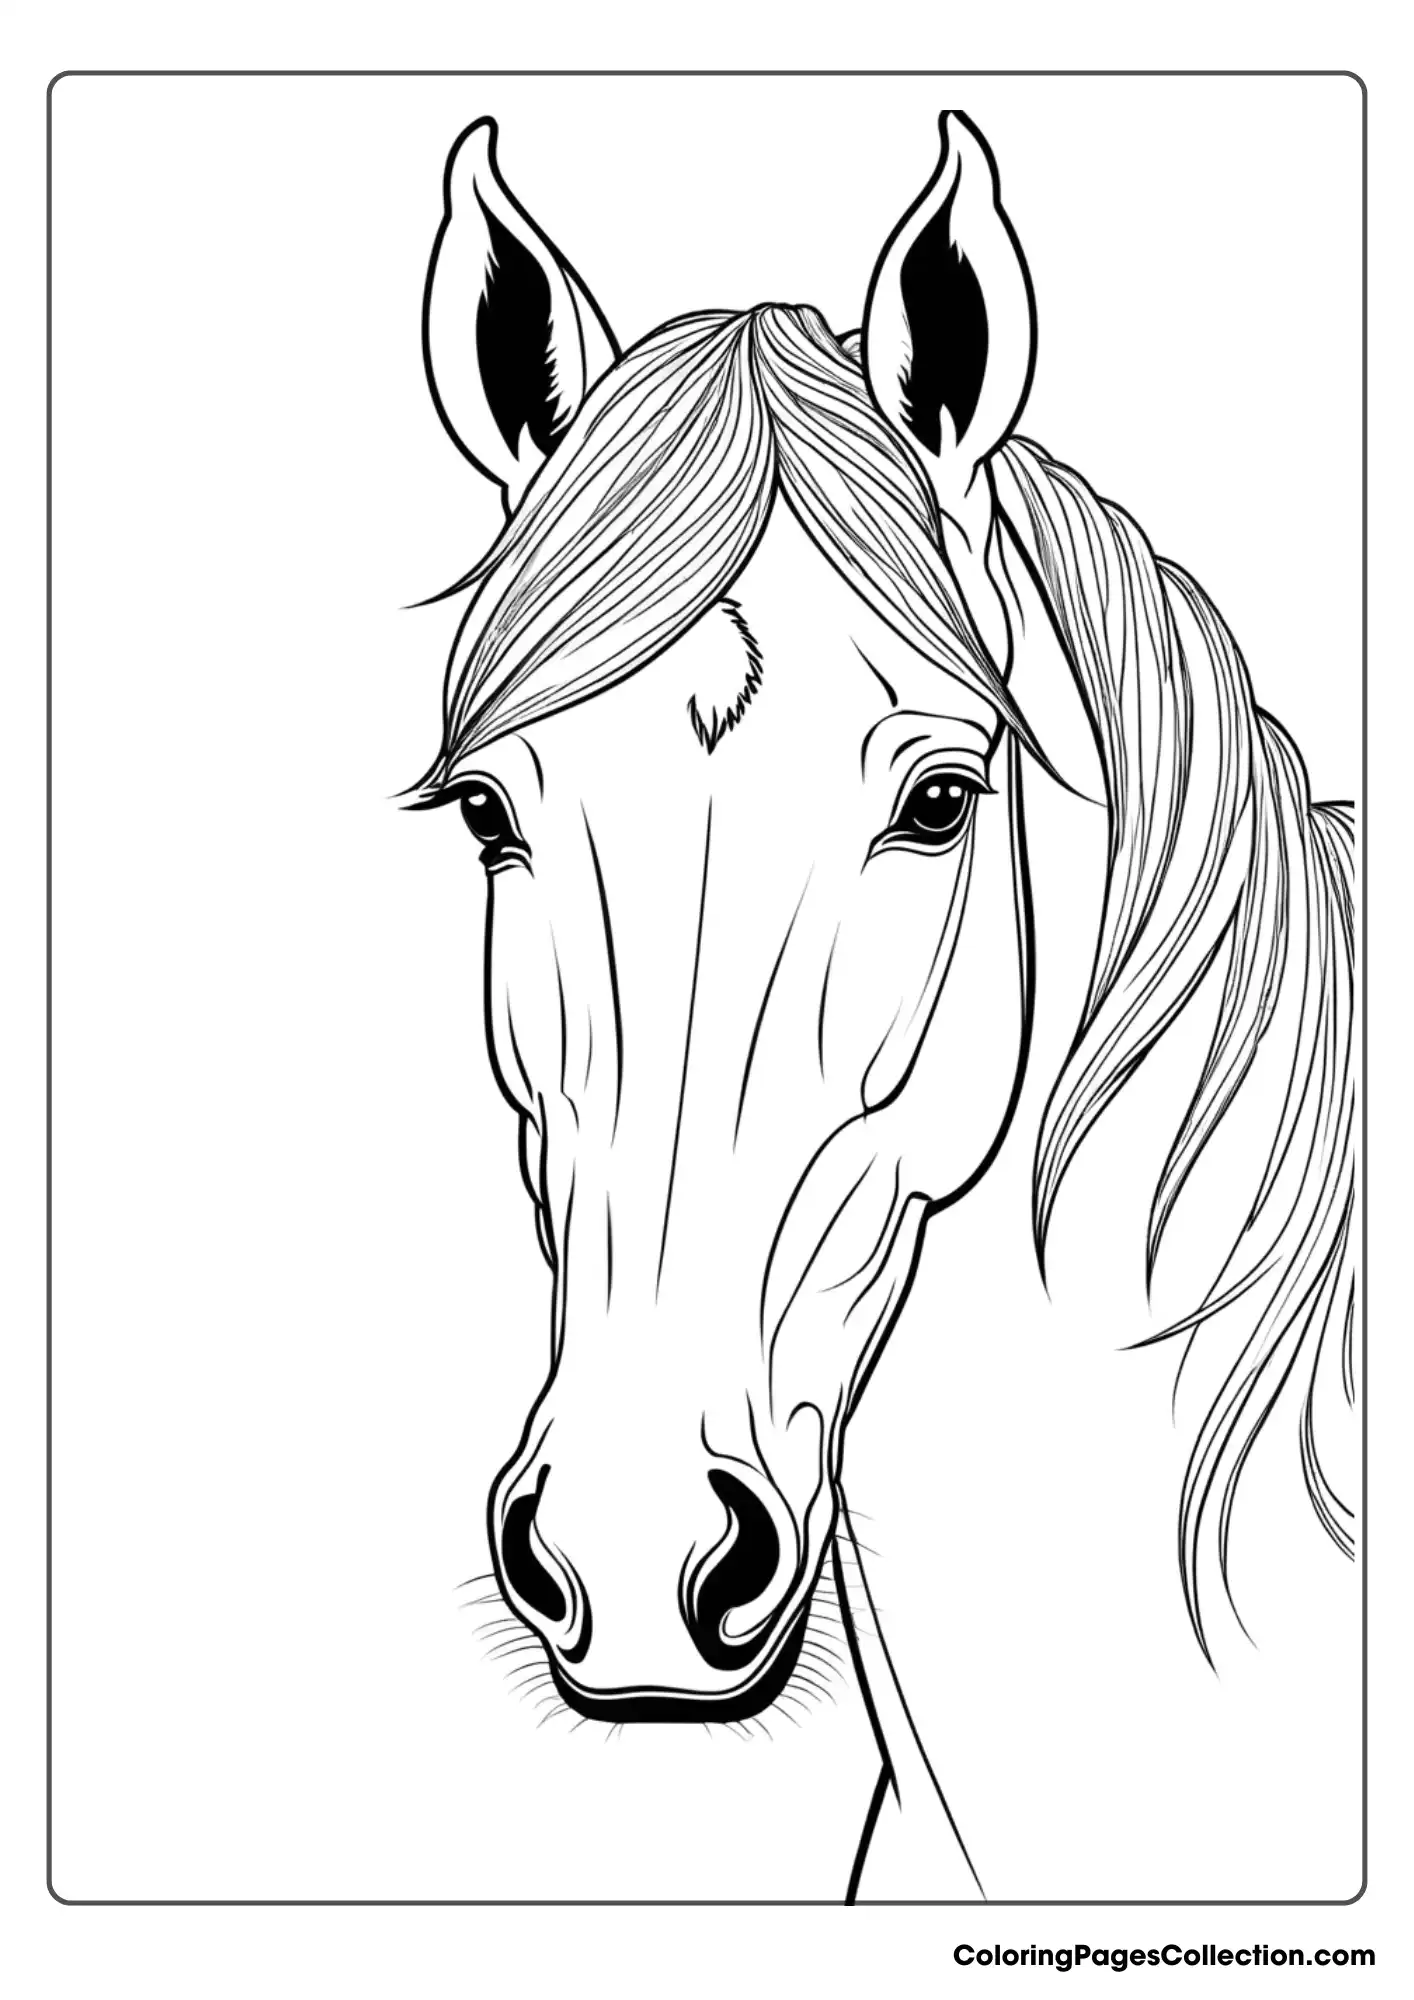 Coloring pages for teens, Beautiful Horse